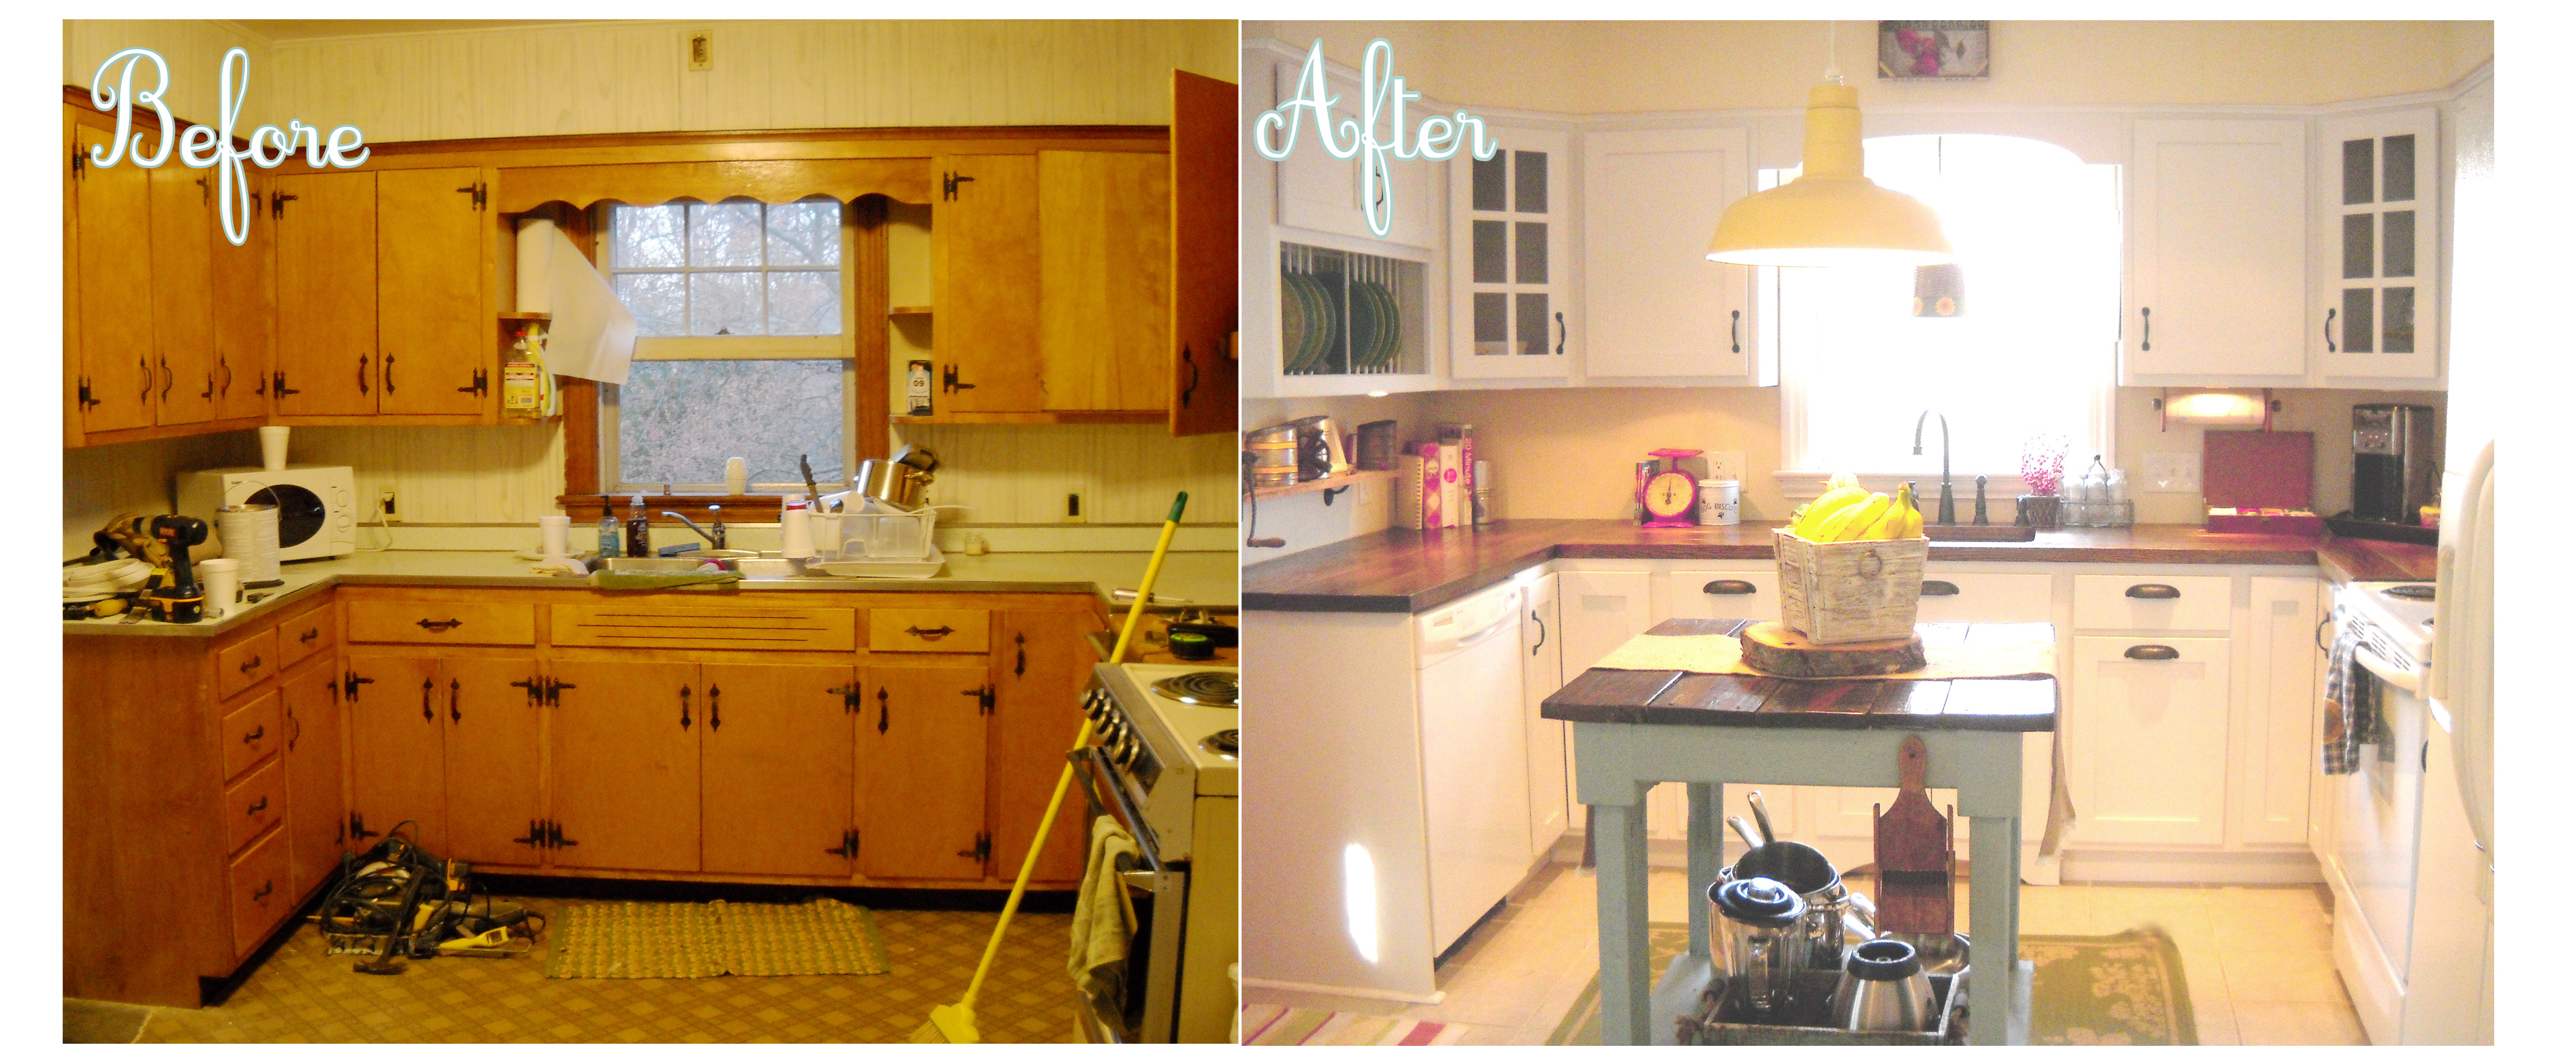 Room Ornament Kitchens Before And After